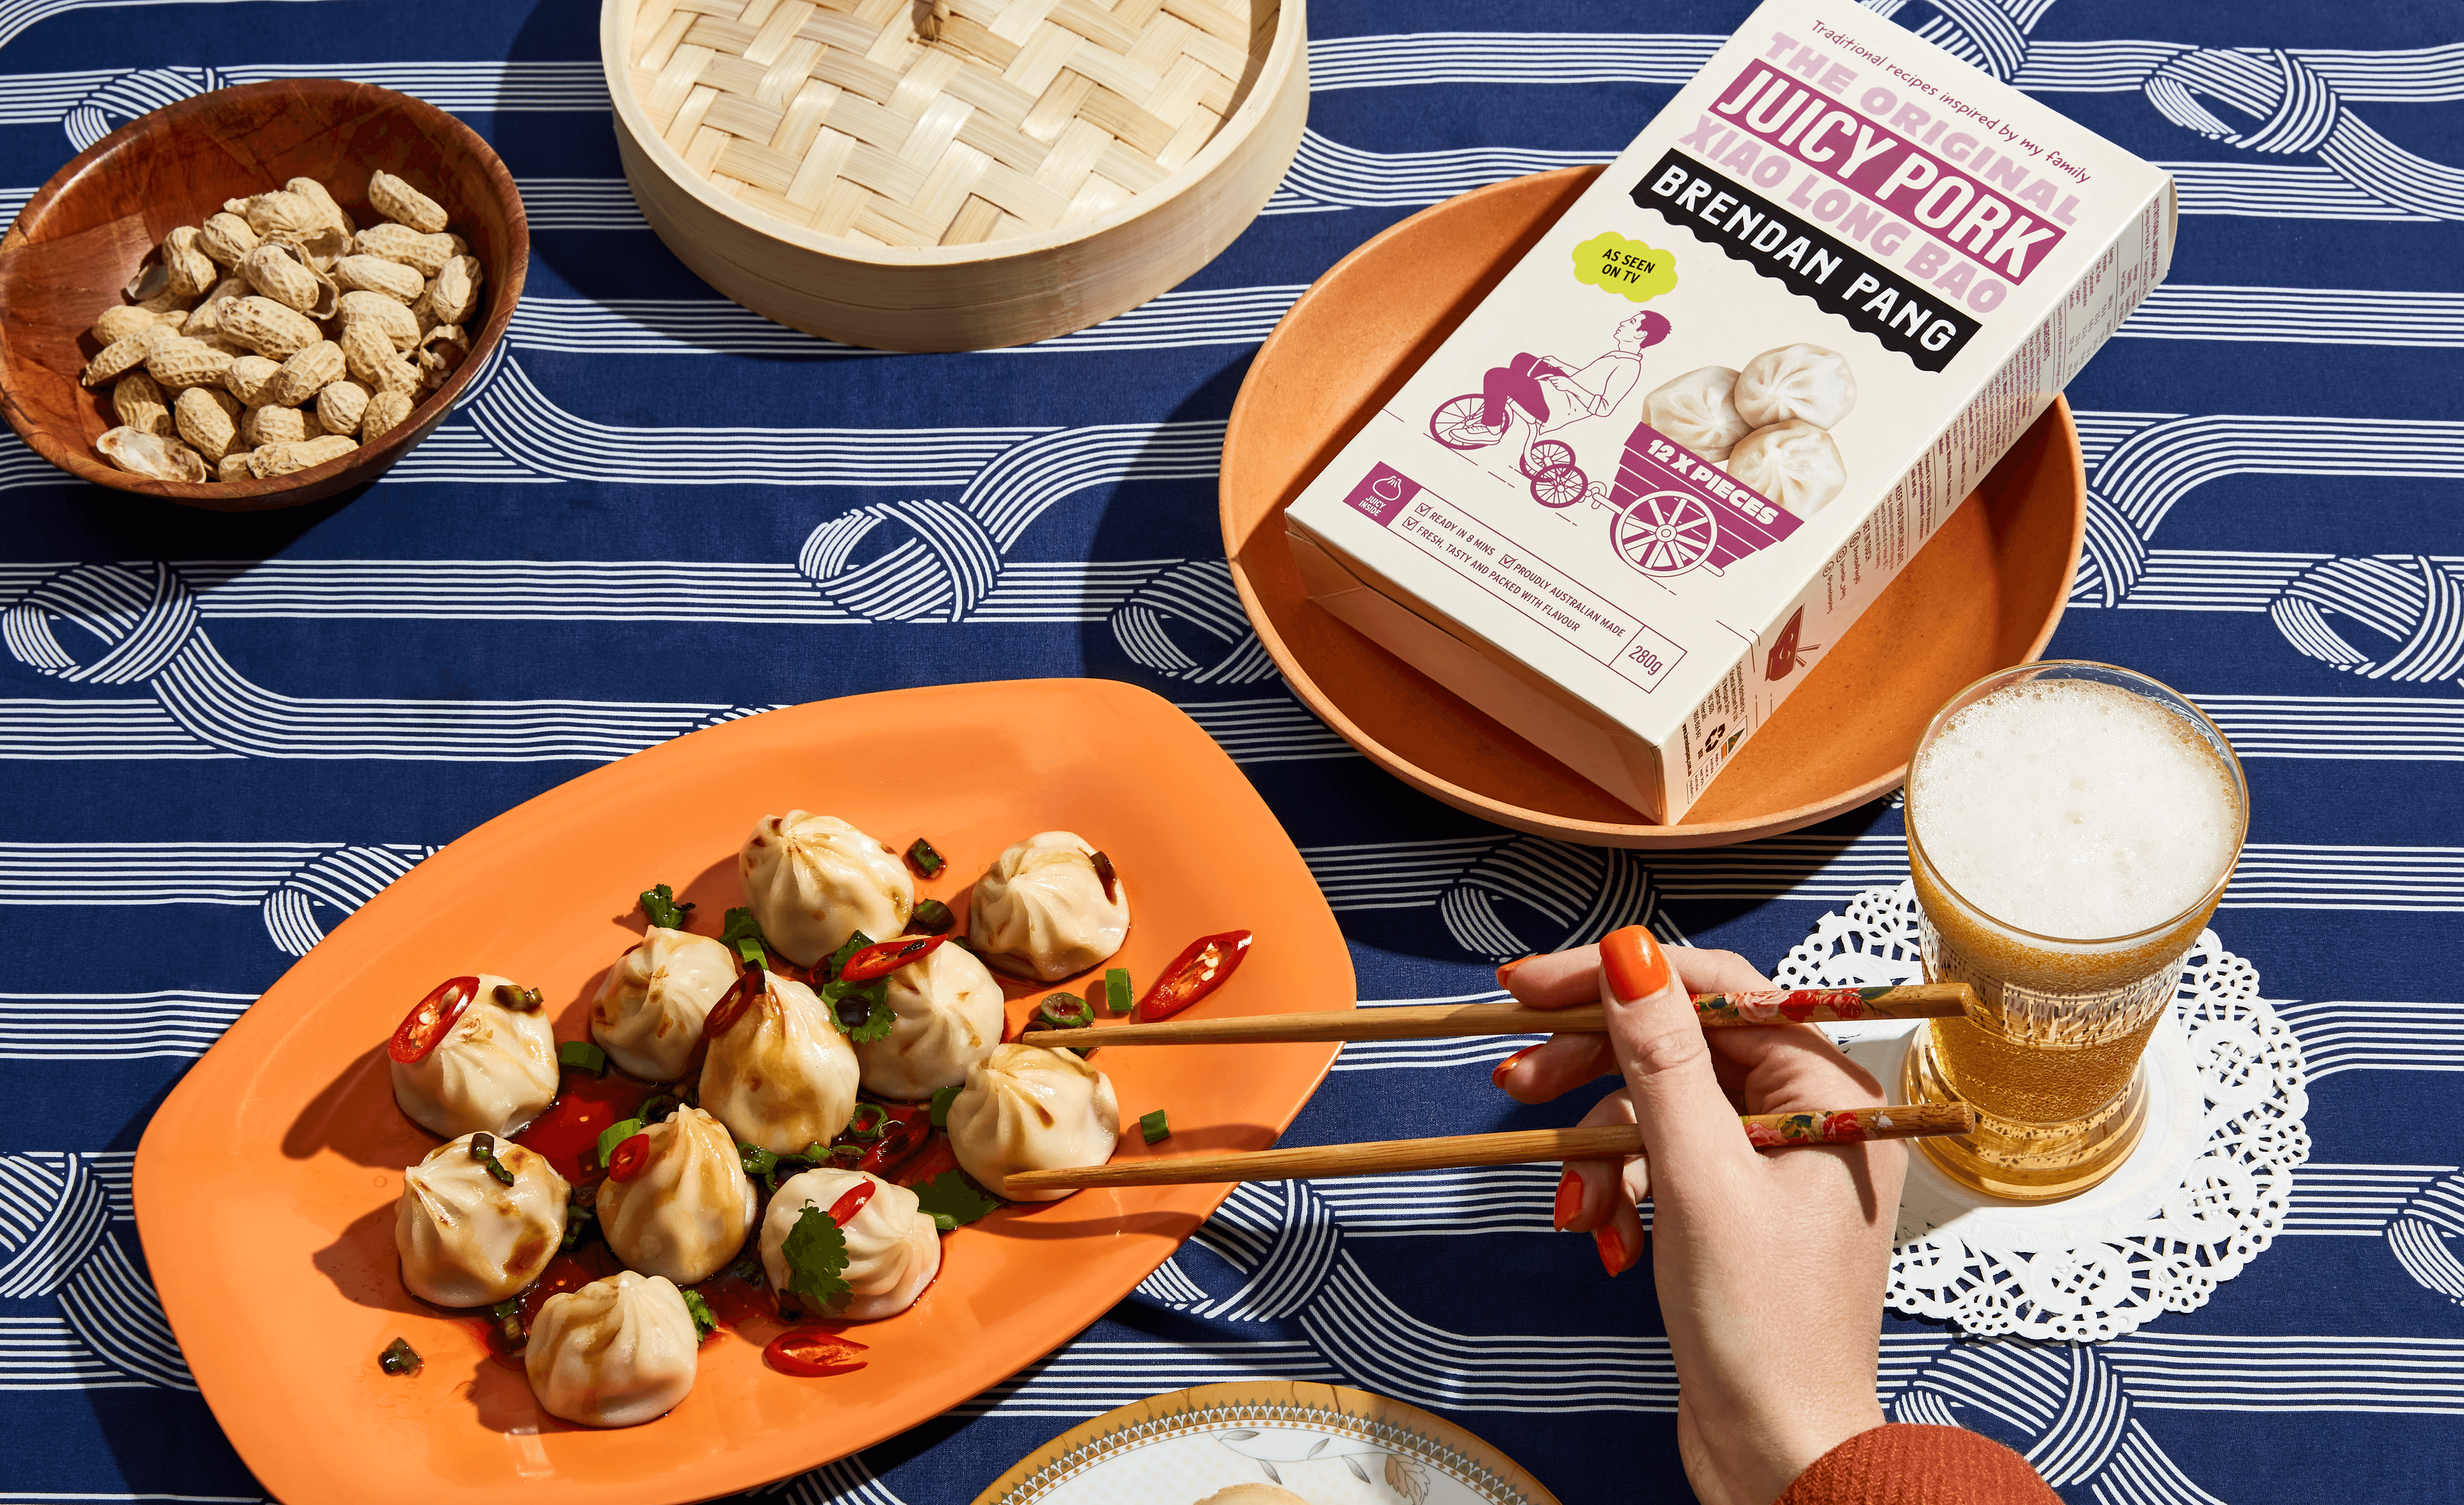 Hand using chopsticks to eat dumplings for Brendan Pang dumpling brand, featuring packaging design by Our Revolution in London and Sydney